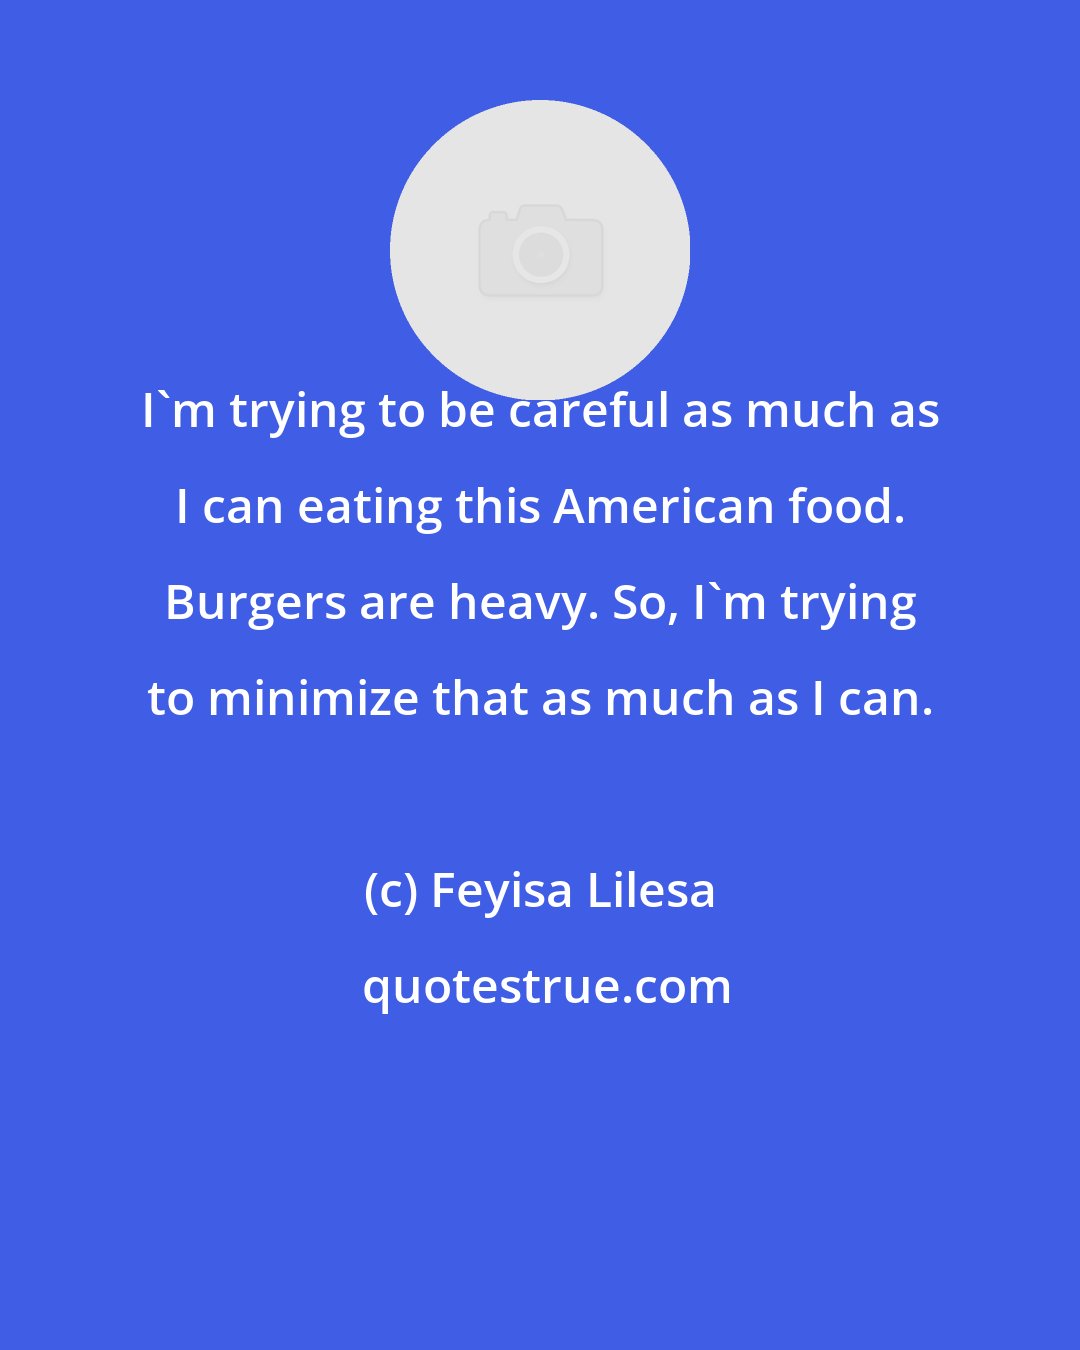 Feyisa Lilesa: I'm trying to be careful as much as I can eating this American food. Burgers are heavy. So, I'm trying to minimize that as much as I can.